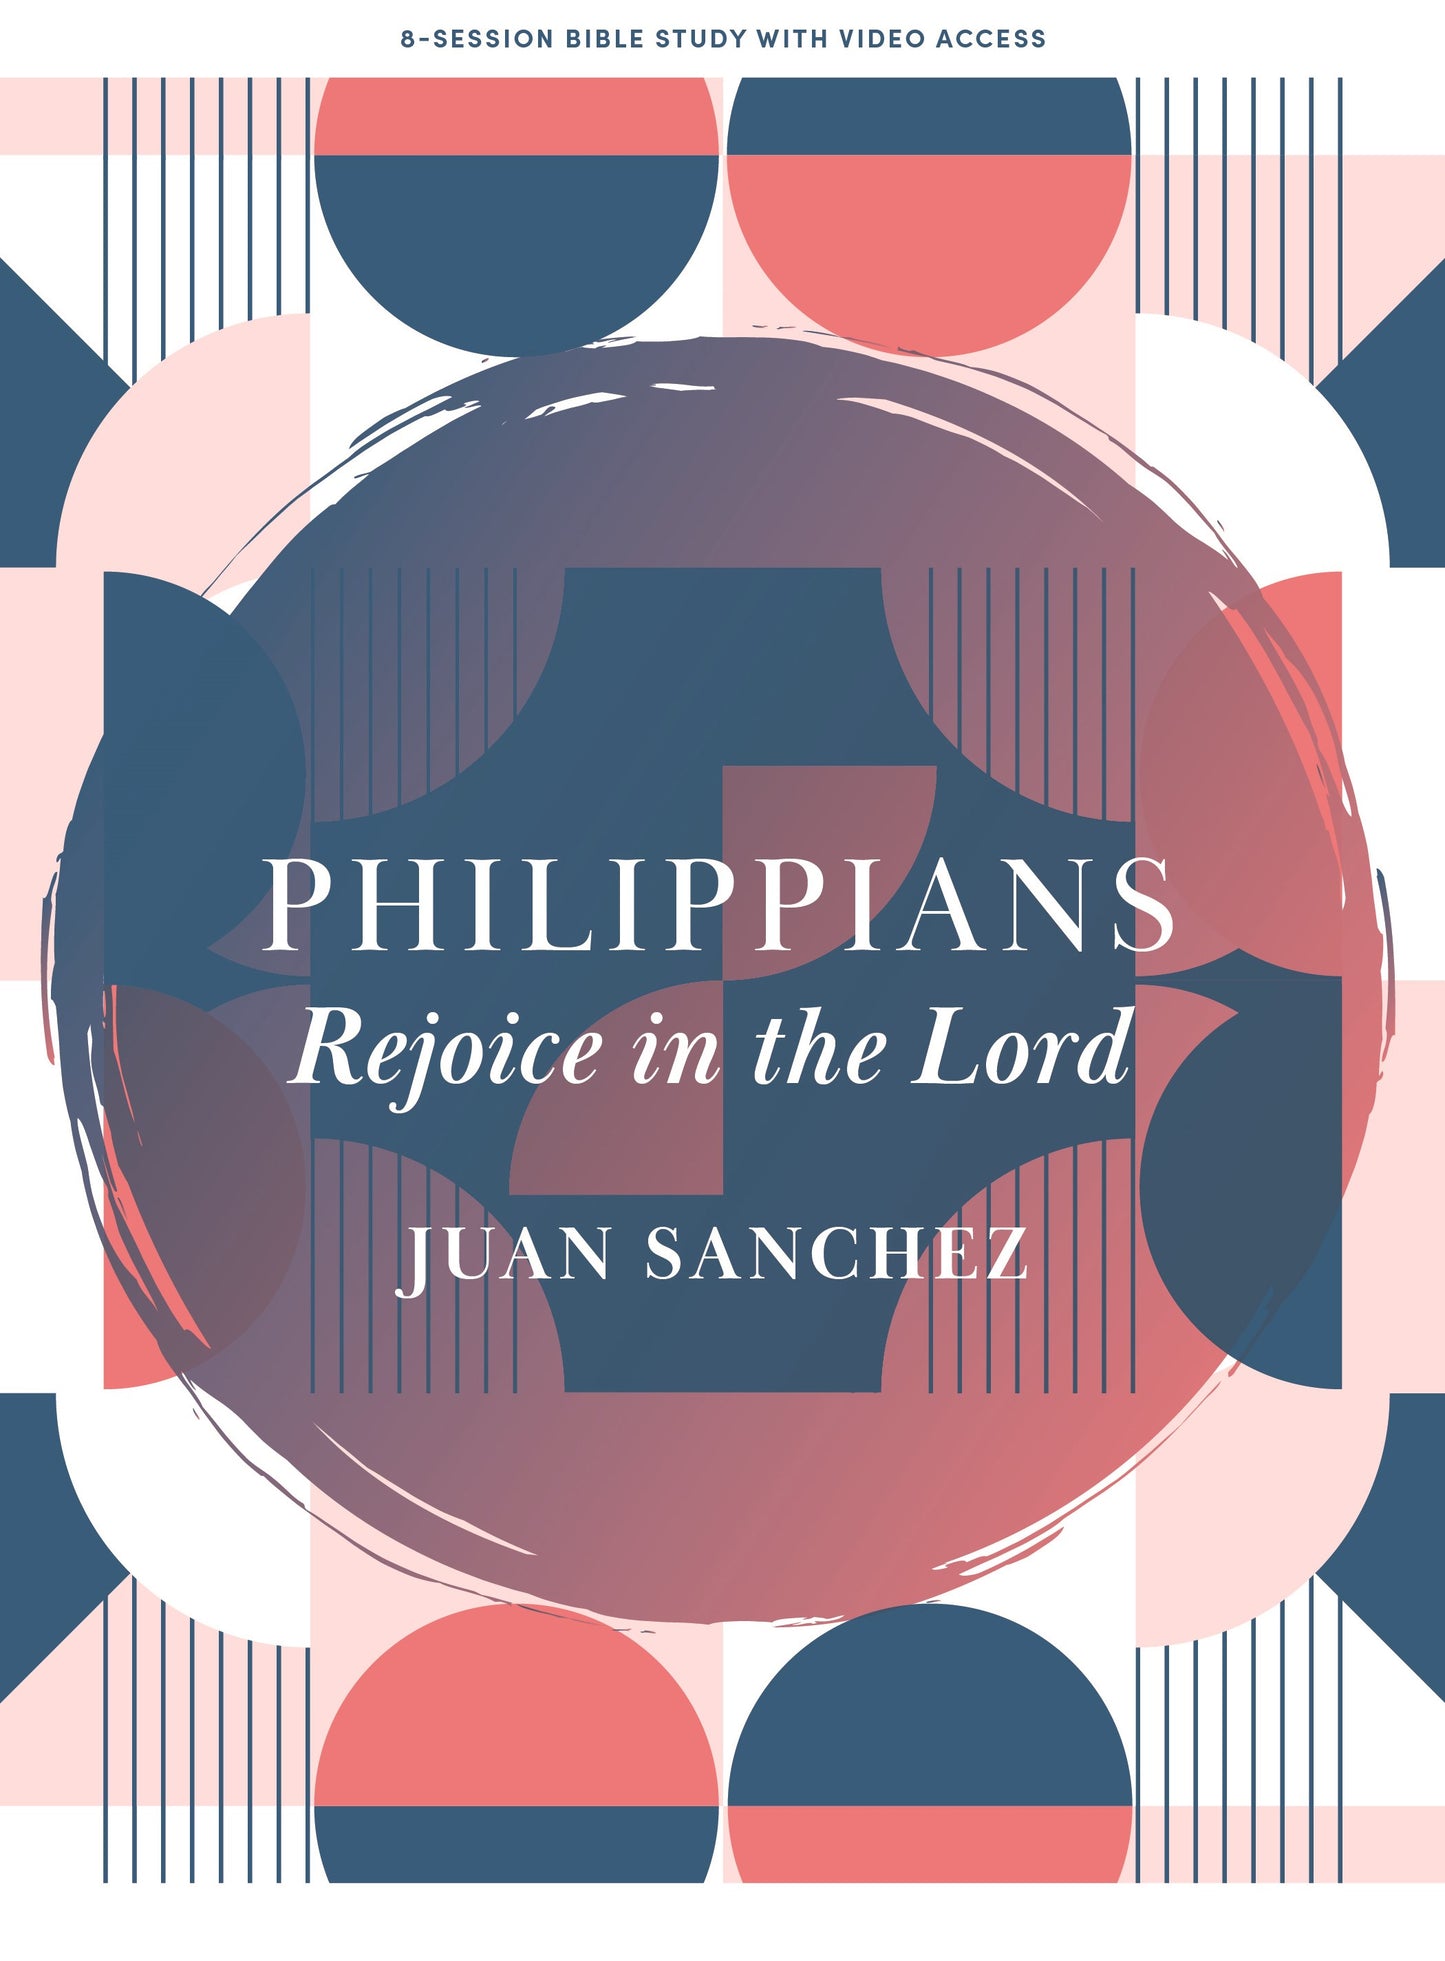 Philippians Bible Study Book with Video Access